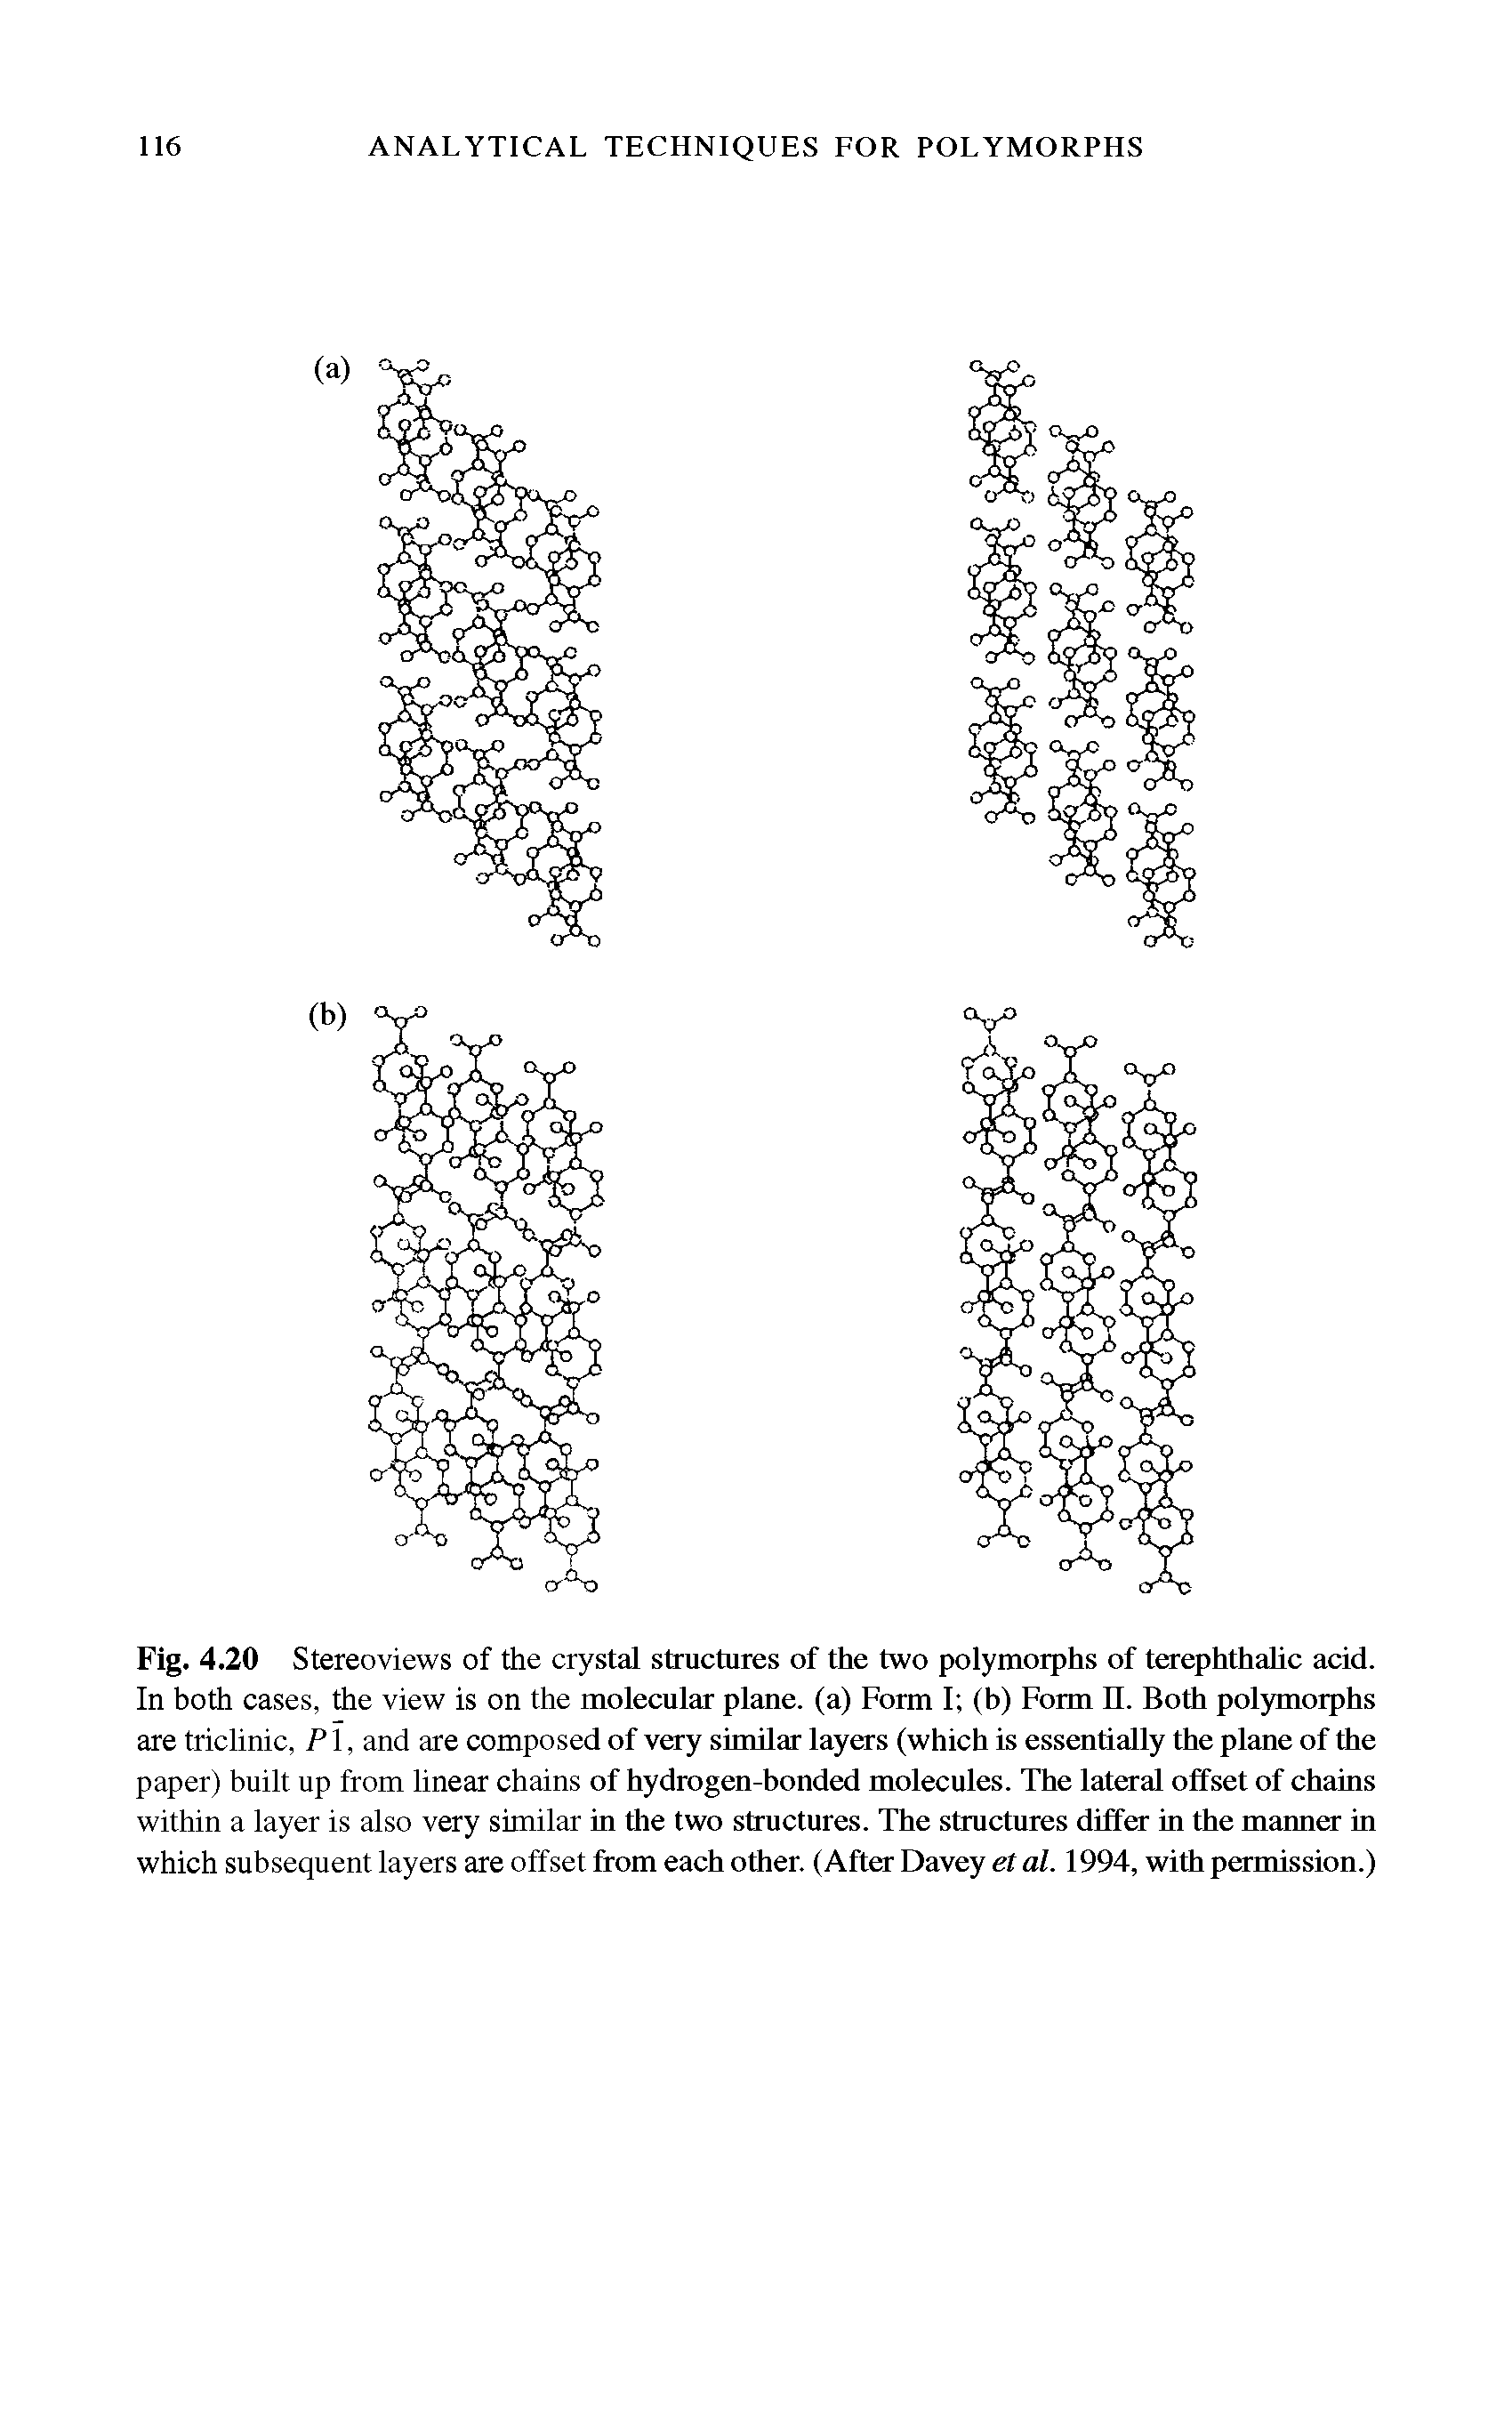 Fig. 4.20 Stereoviews of the crystal structures of the two polymorphs of terephthalic acid. In both cases, the view is on the molecular plane, (a) Form I (b) Form II. Both polymorphs are triclinic, PI, and are composed of very similar layers (which is essentially the plane of the paper) built up from linear chains of hydrogen-bonded molecules. The lateral offset of chains within a layer is also very similar in the two structures. The structures differ in the maimer in which subsequent layers are offset from each other. (After Davey et al. 1994, with permission.)...